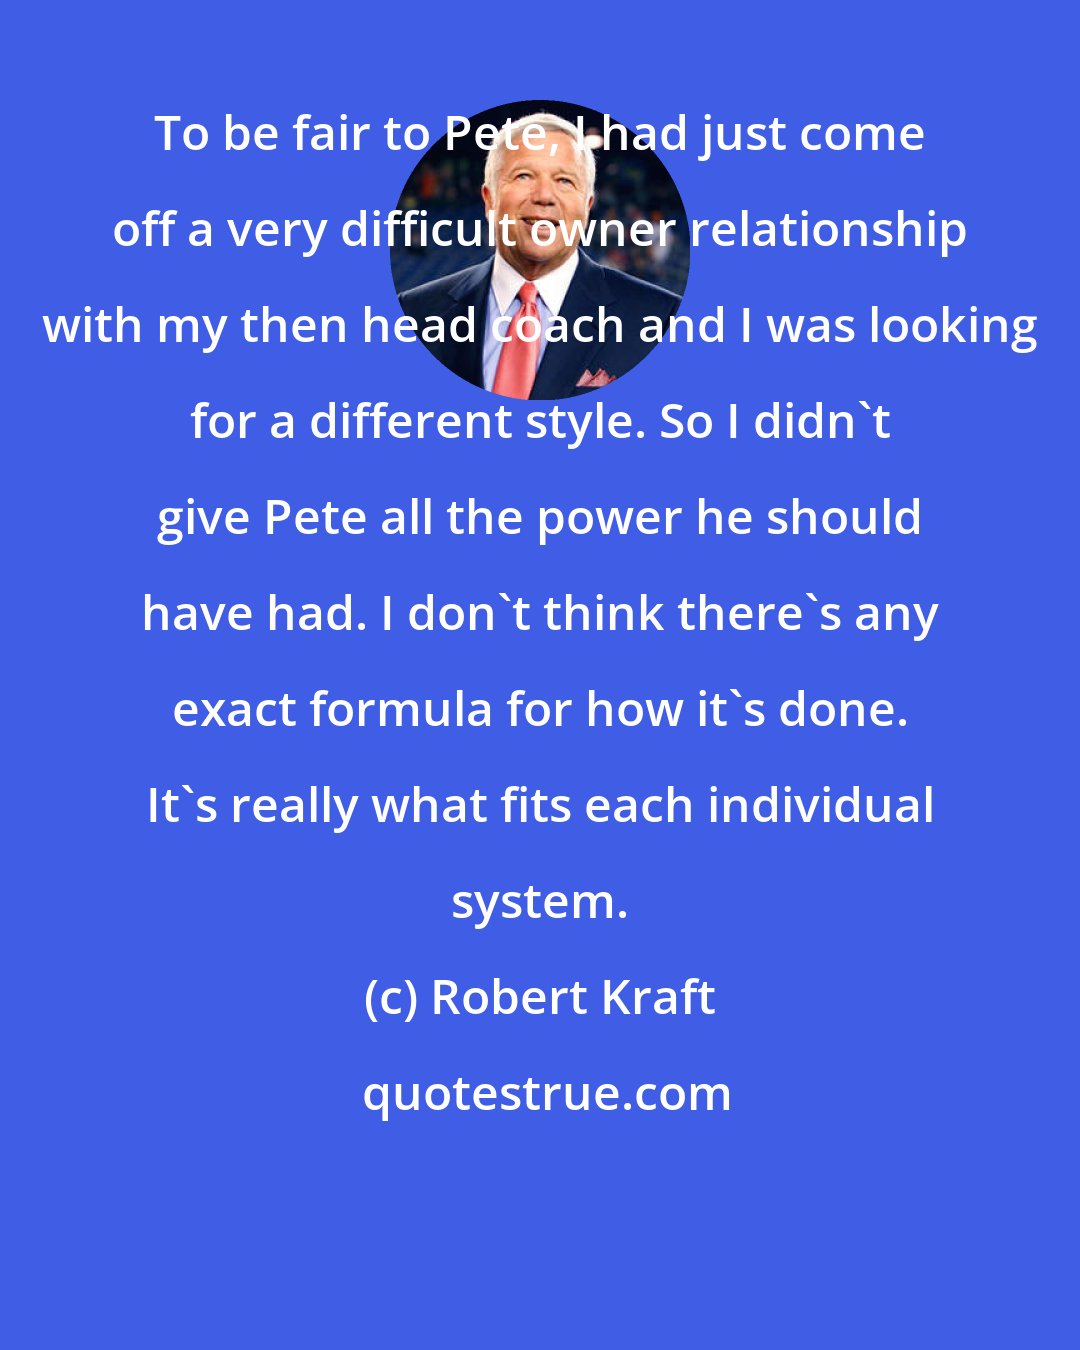 Robert Kraft: To be fair to Pete, I had just come off a very difficult owner relationship with my then head coach and I was looking for a different style. So I didn't give Pete all the power he should have had. I don't think there's any exact formula for how it's done. It's really what fits each individual system.